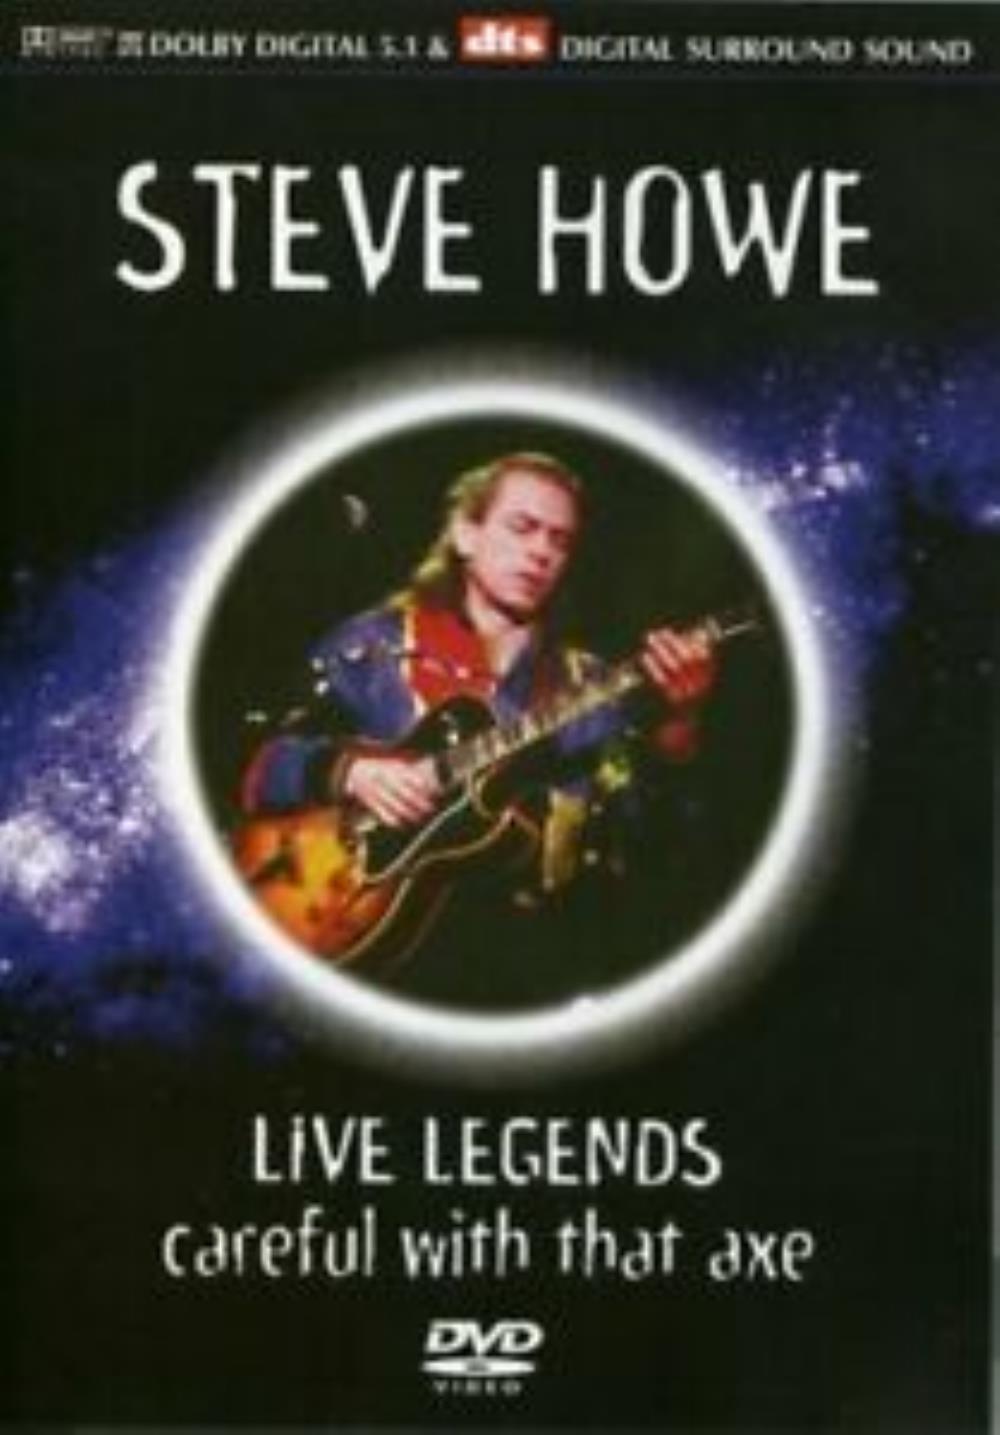  Live Legends - Careful With That Axe by HOWE, STEVE album cover